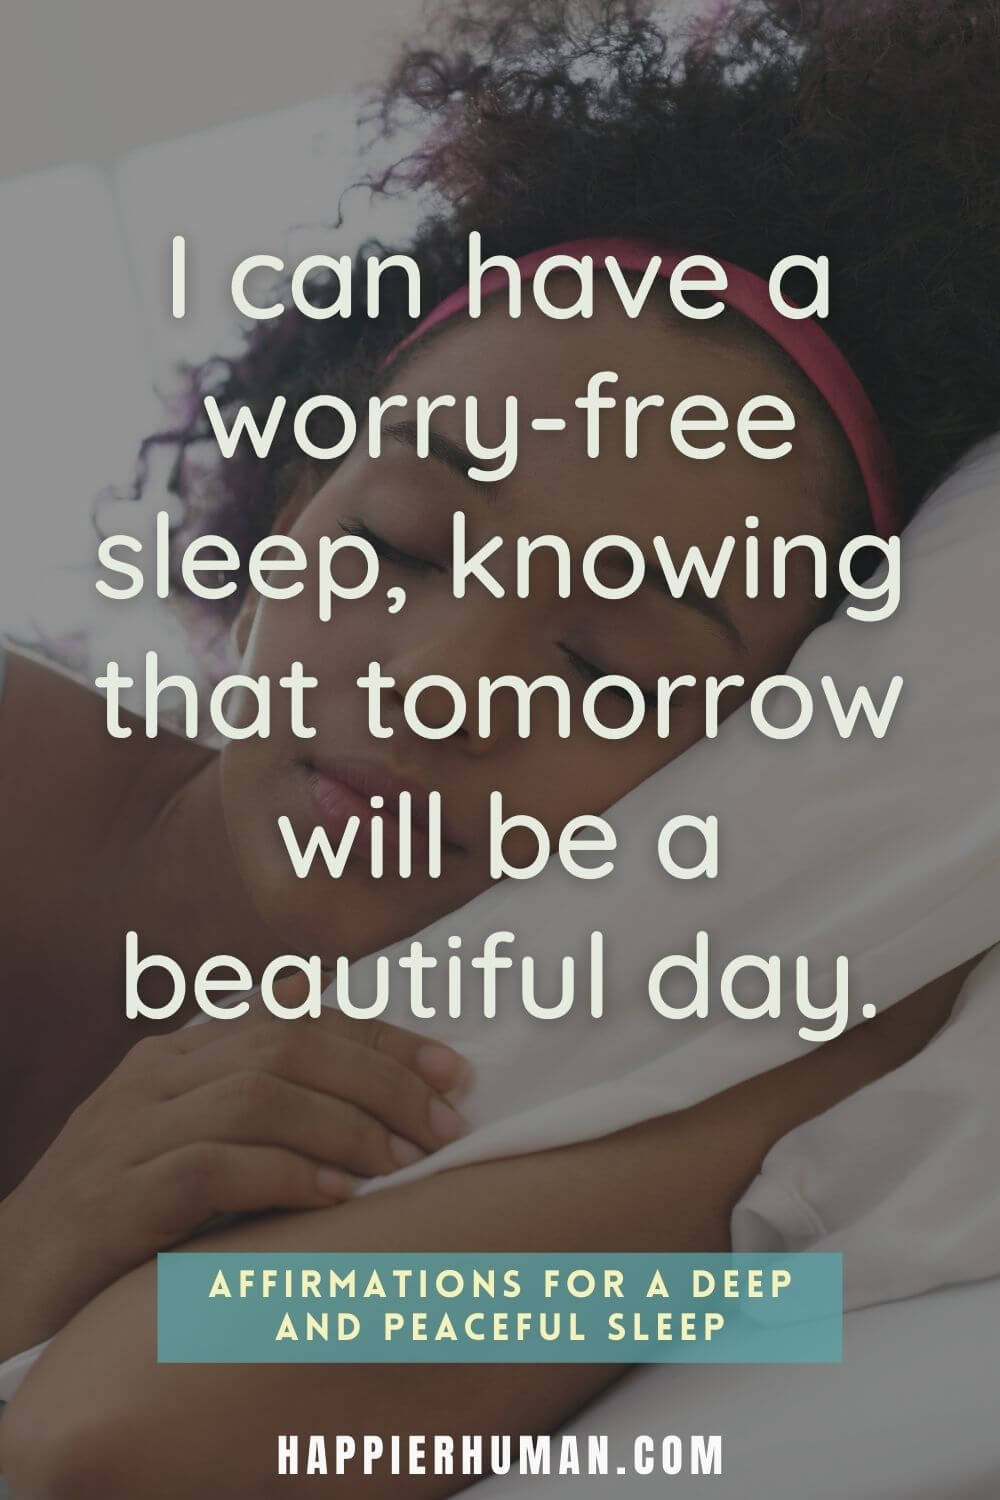 Affirmations for Sleep - I can have a worry-free sleep, knowing that tomorrow will be a beautiful day. | abundance affirmations before sleep | affirmations for sleep anxiety | sleep affirmations for success